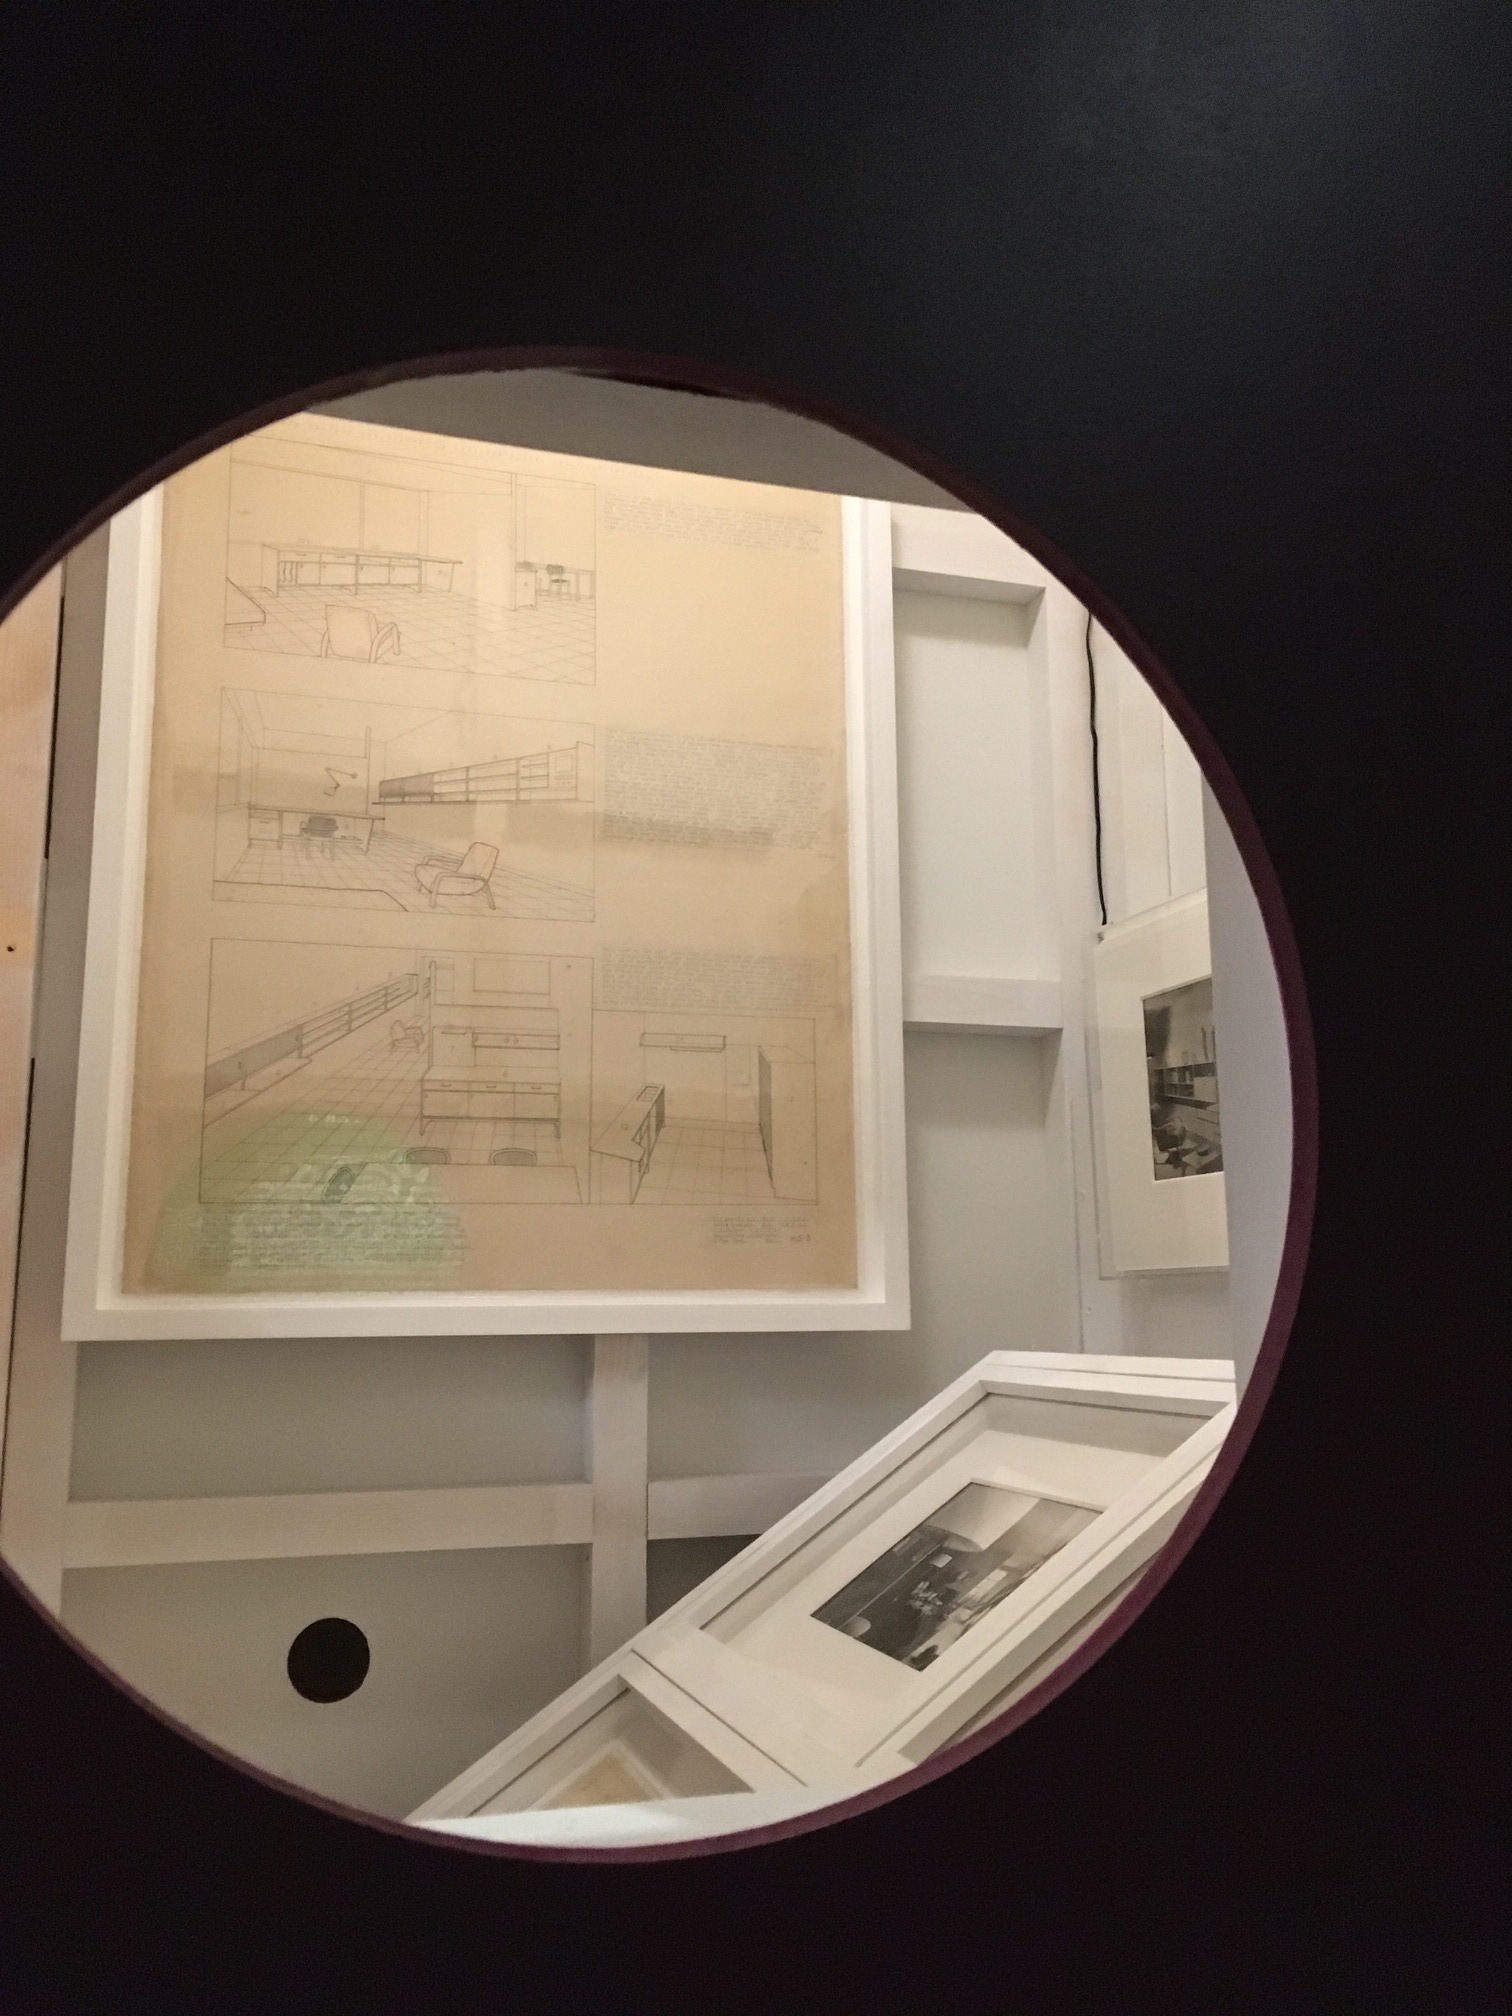 Architectural sketches which are way too far to see through a peep hole